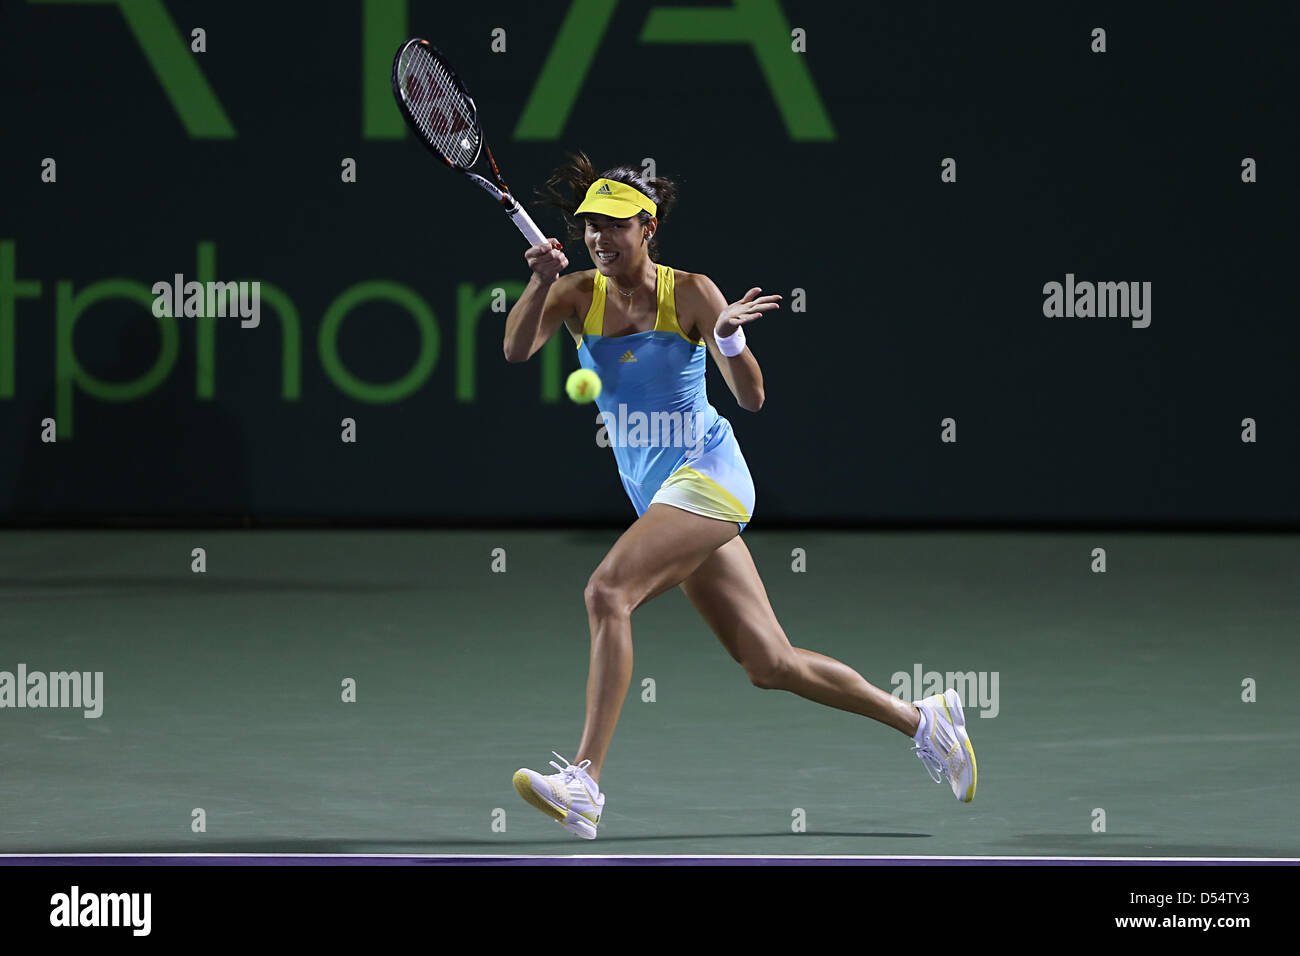 Miami, Florida, USA. 24th March 2013. Ana ivanovic of Serbia in action during the Sony Open 2013. Credit:  Mauricio Paiz / Alamy Live News Stock Photo